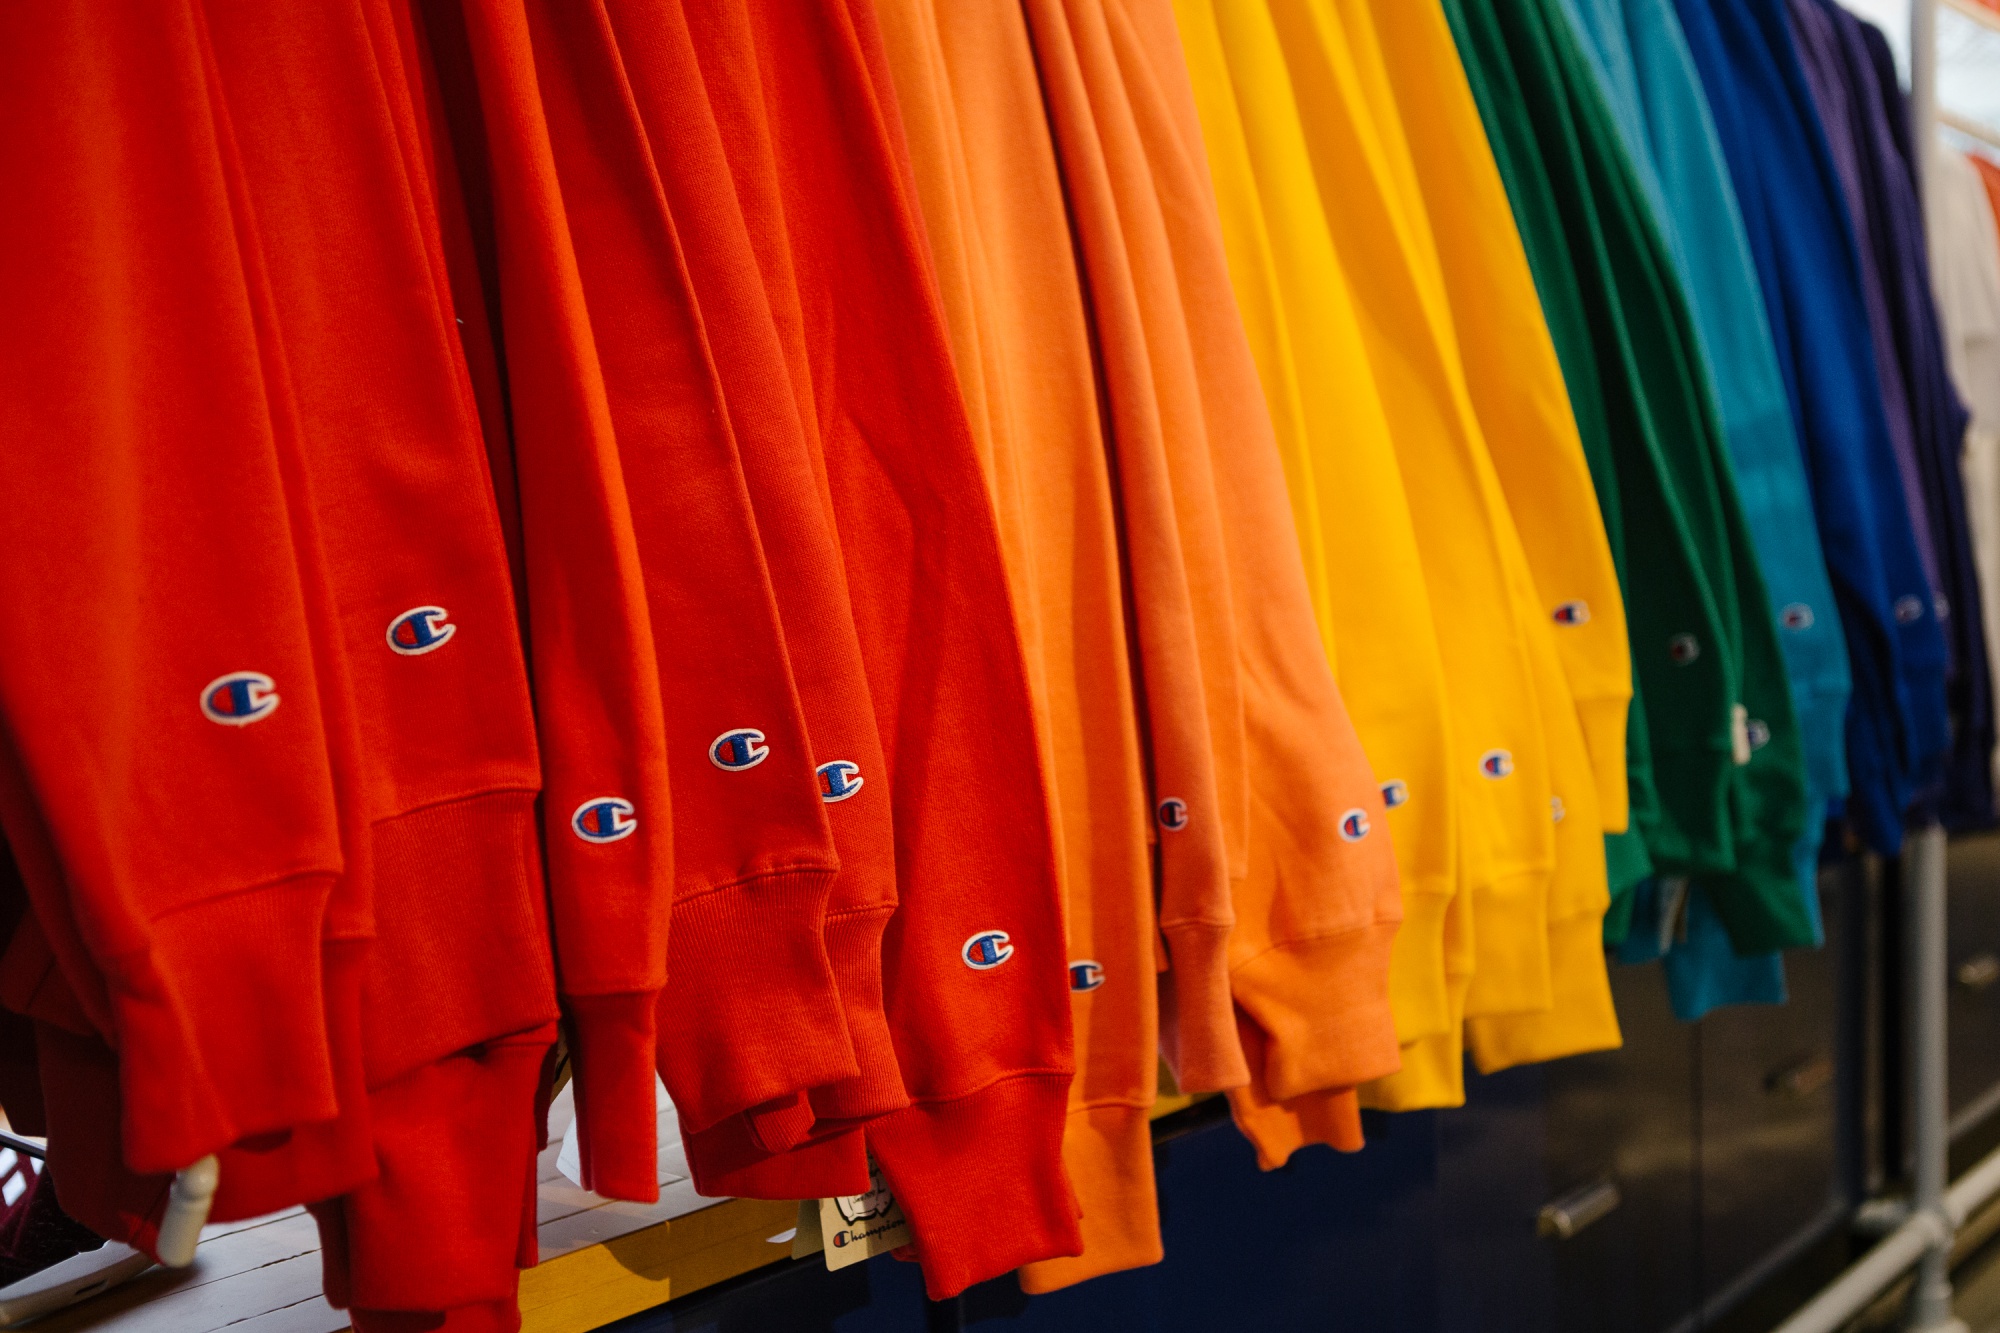 Champion Brand Clothing, Shoes Latest Fashion Trend - Bloomberg